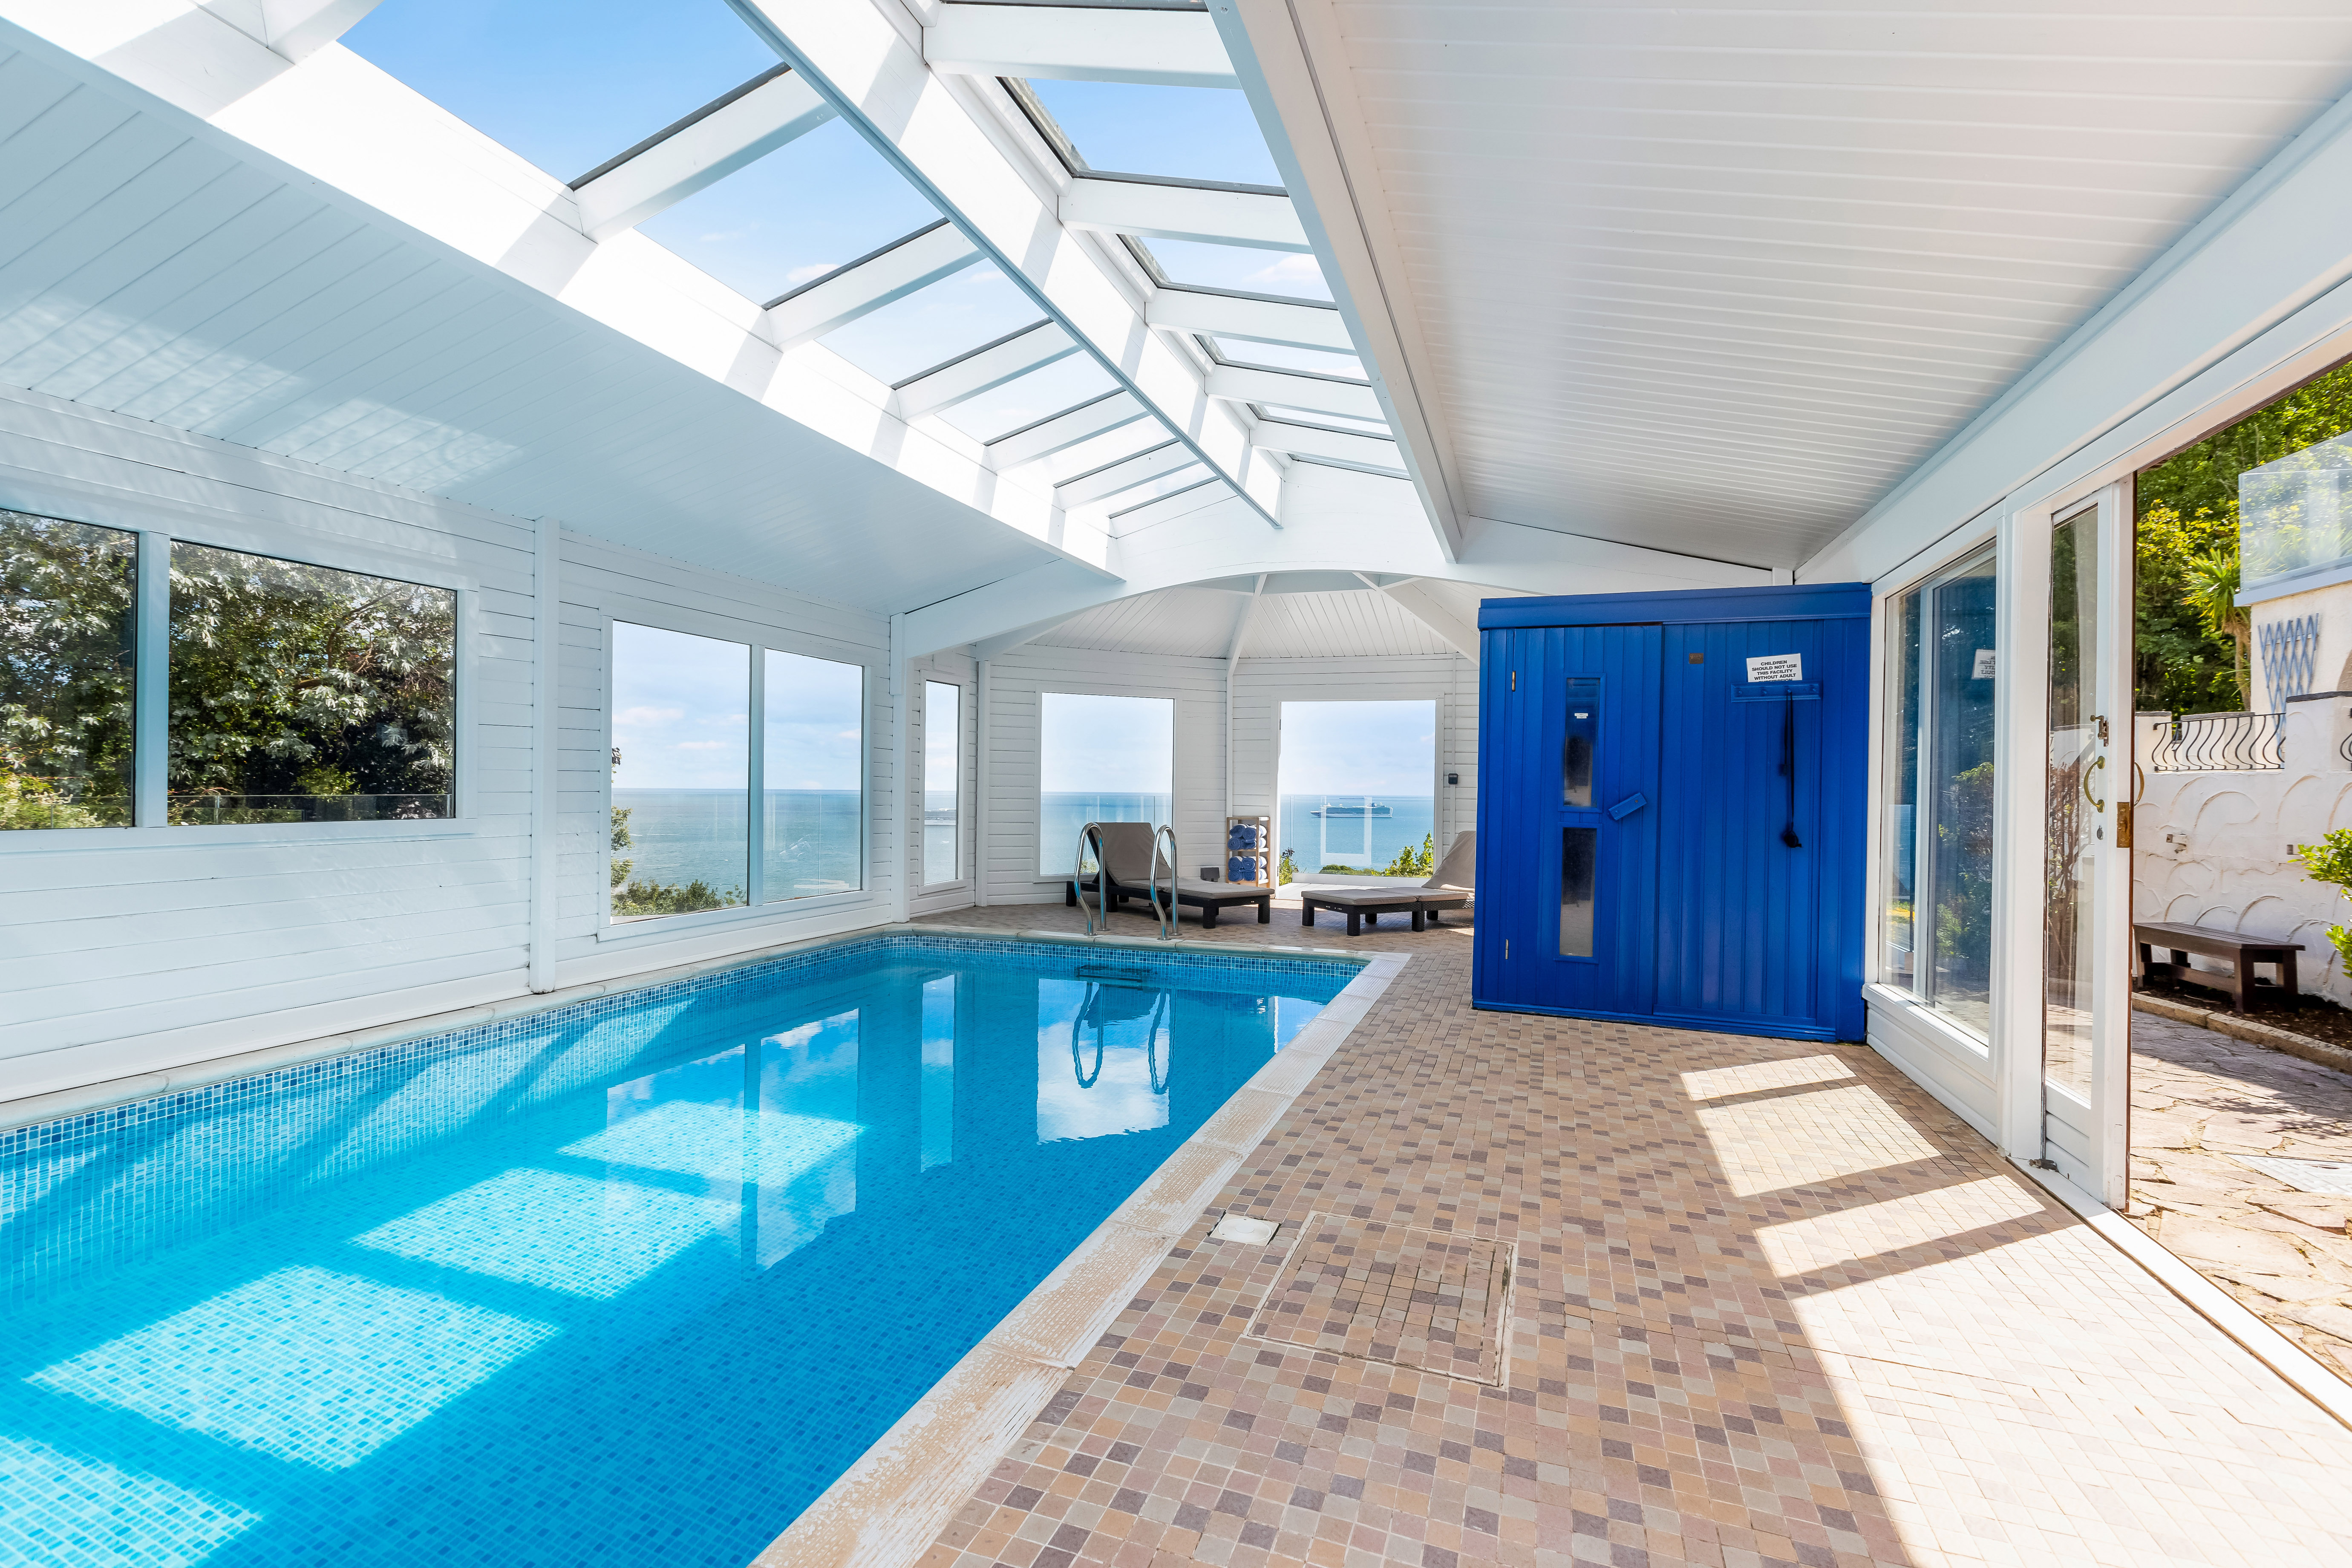 Cliff Lodge - stunning sea views from the covered swimming pool